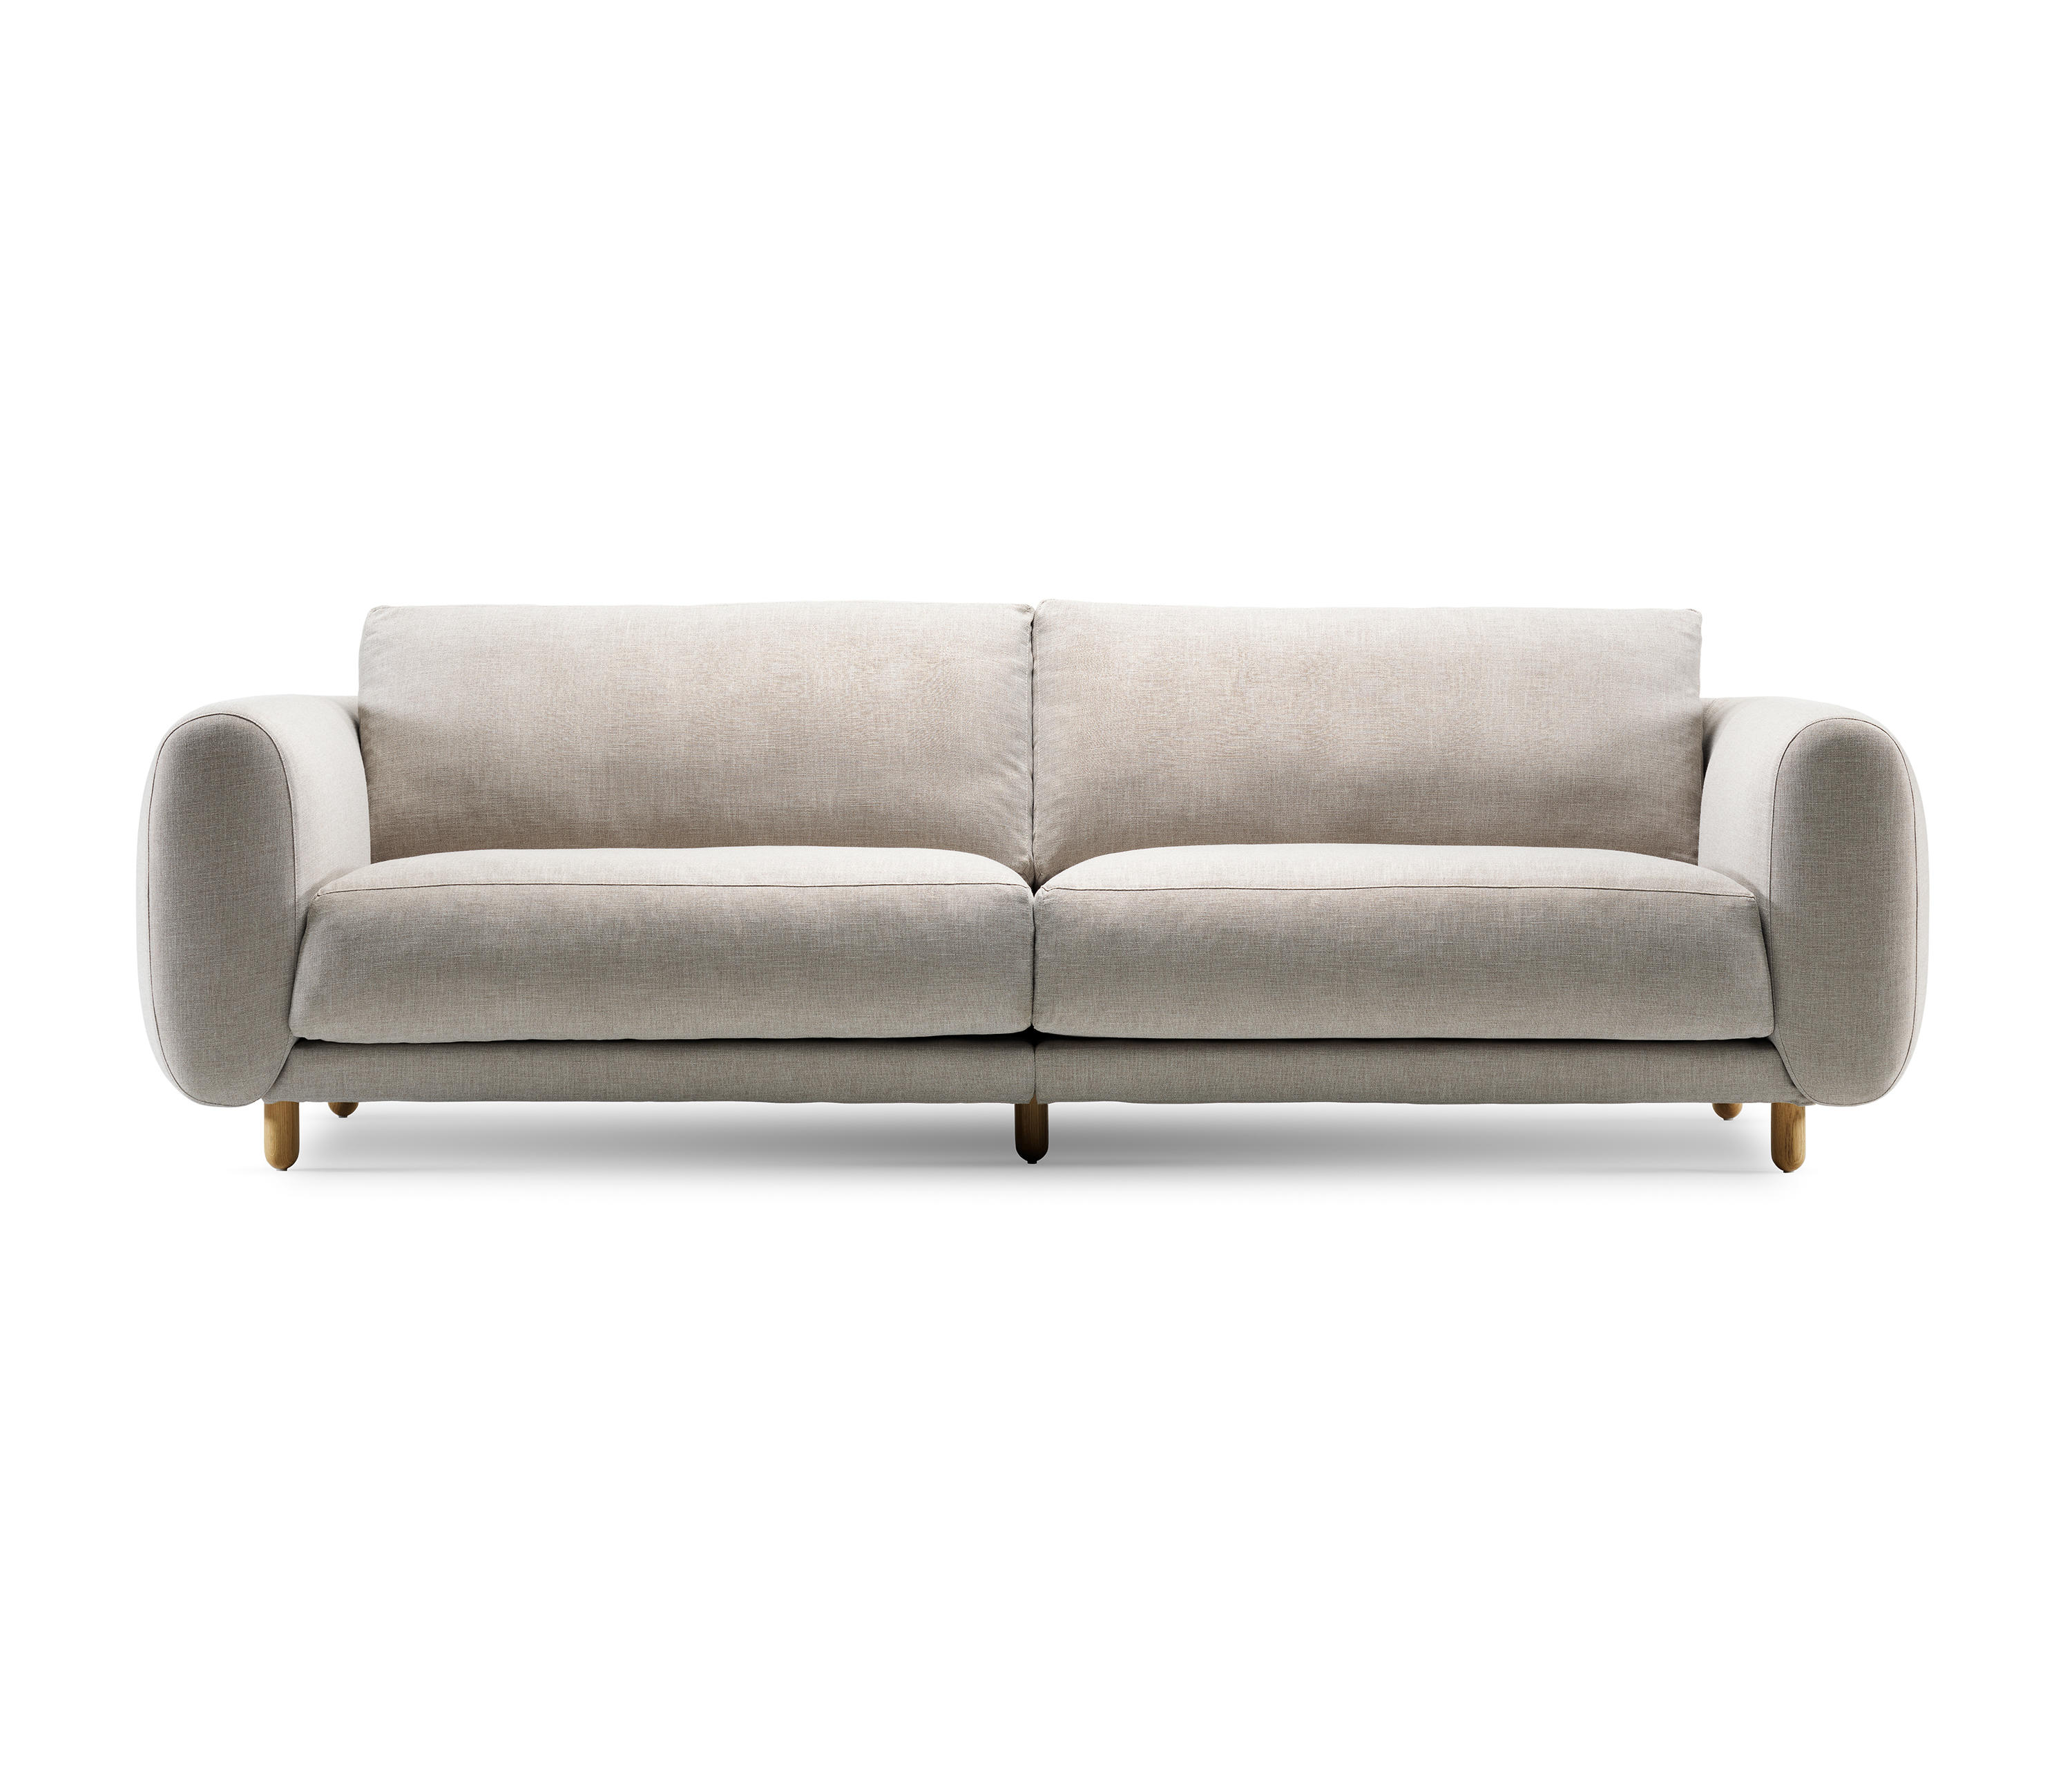 CAMPO - Lounge sofas from Fogia | Architonic